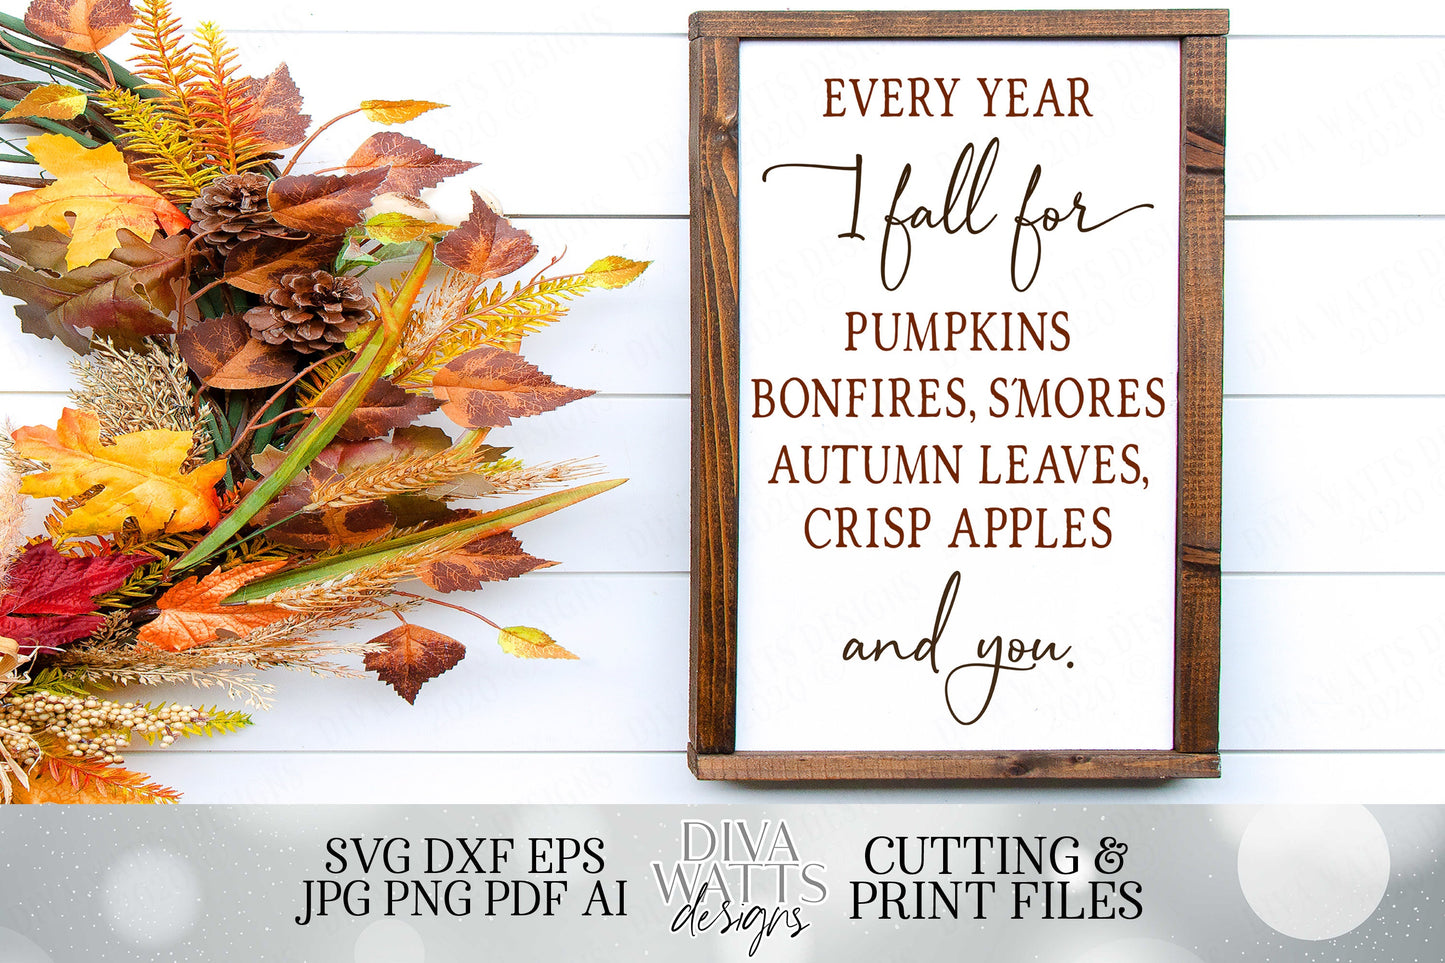 Every Year I Fall For Pumpkins, Bonfires, S'mores, Autumn Leaves, Crisp Apples and You. | Autumn Cutting File and Printable | SVG DXF JPG